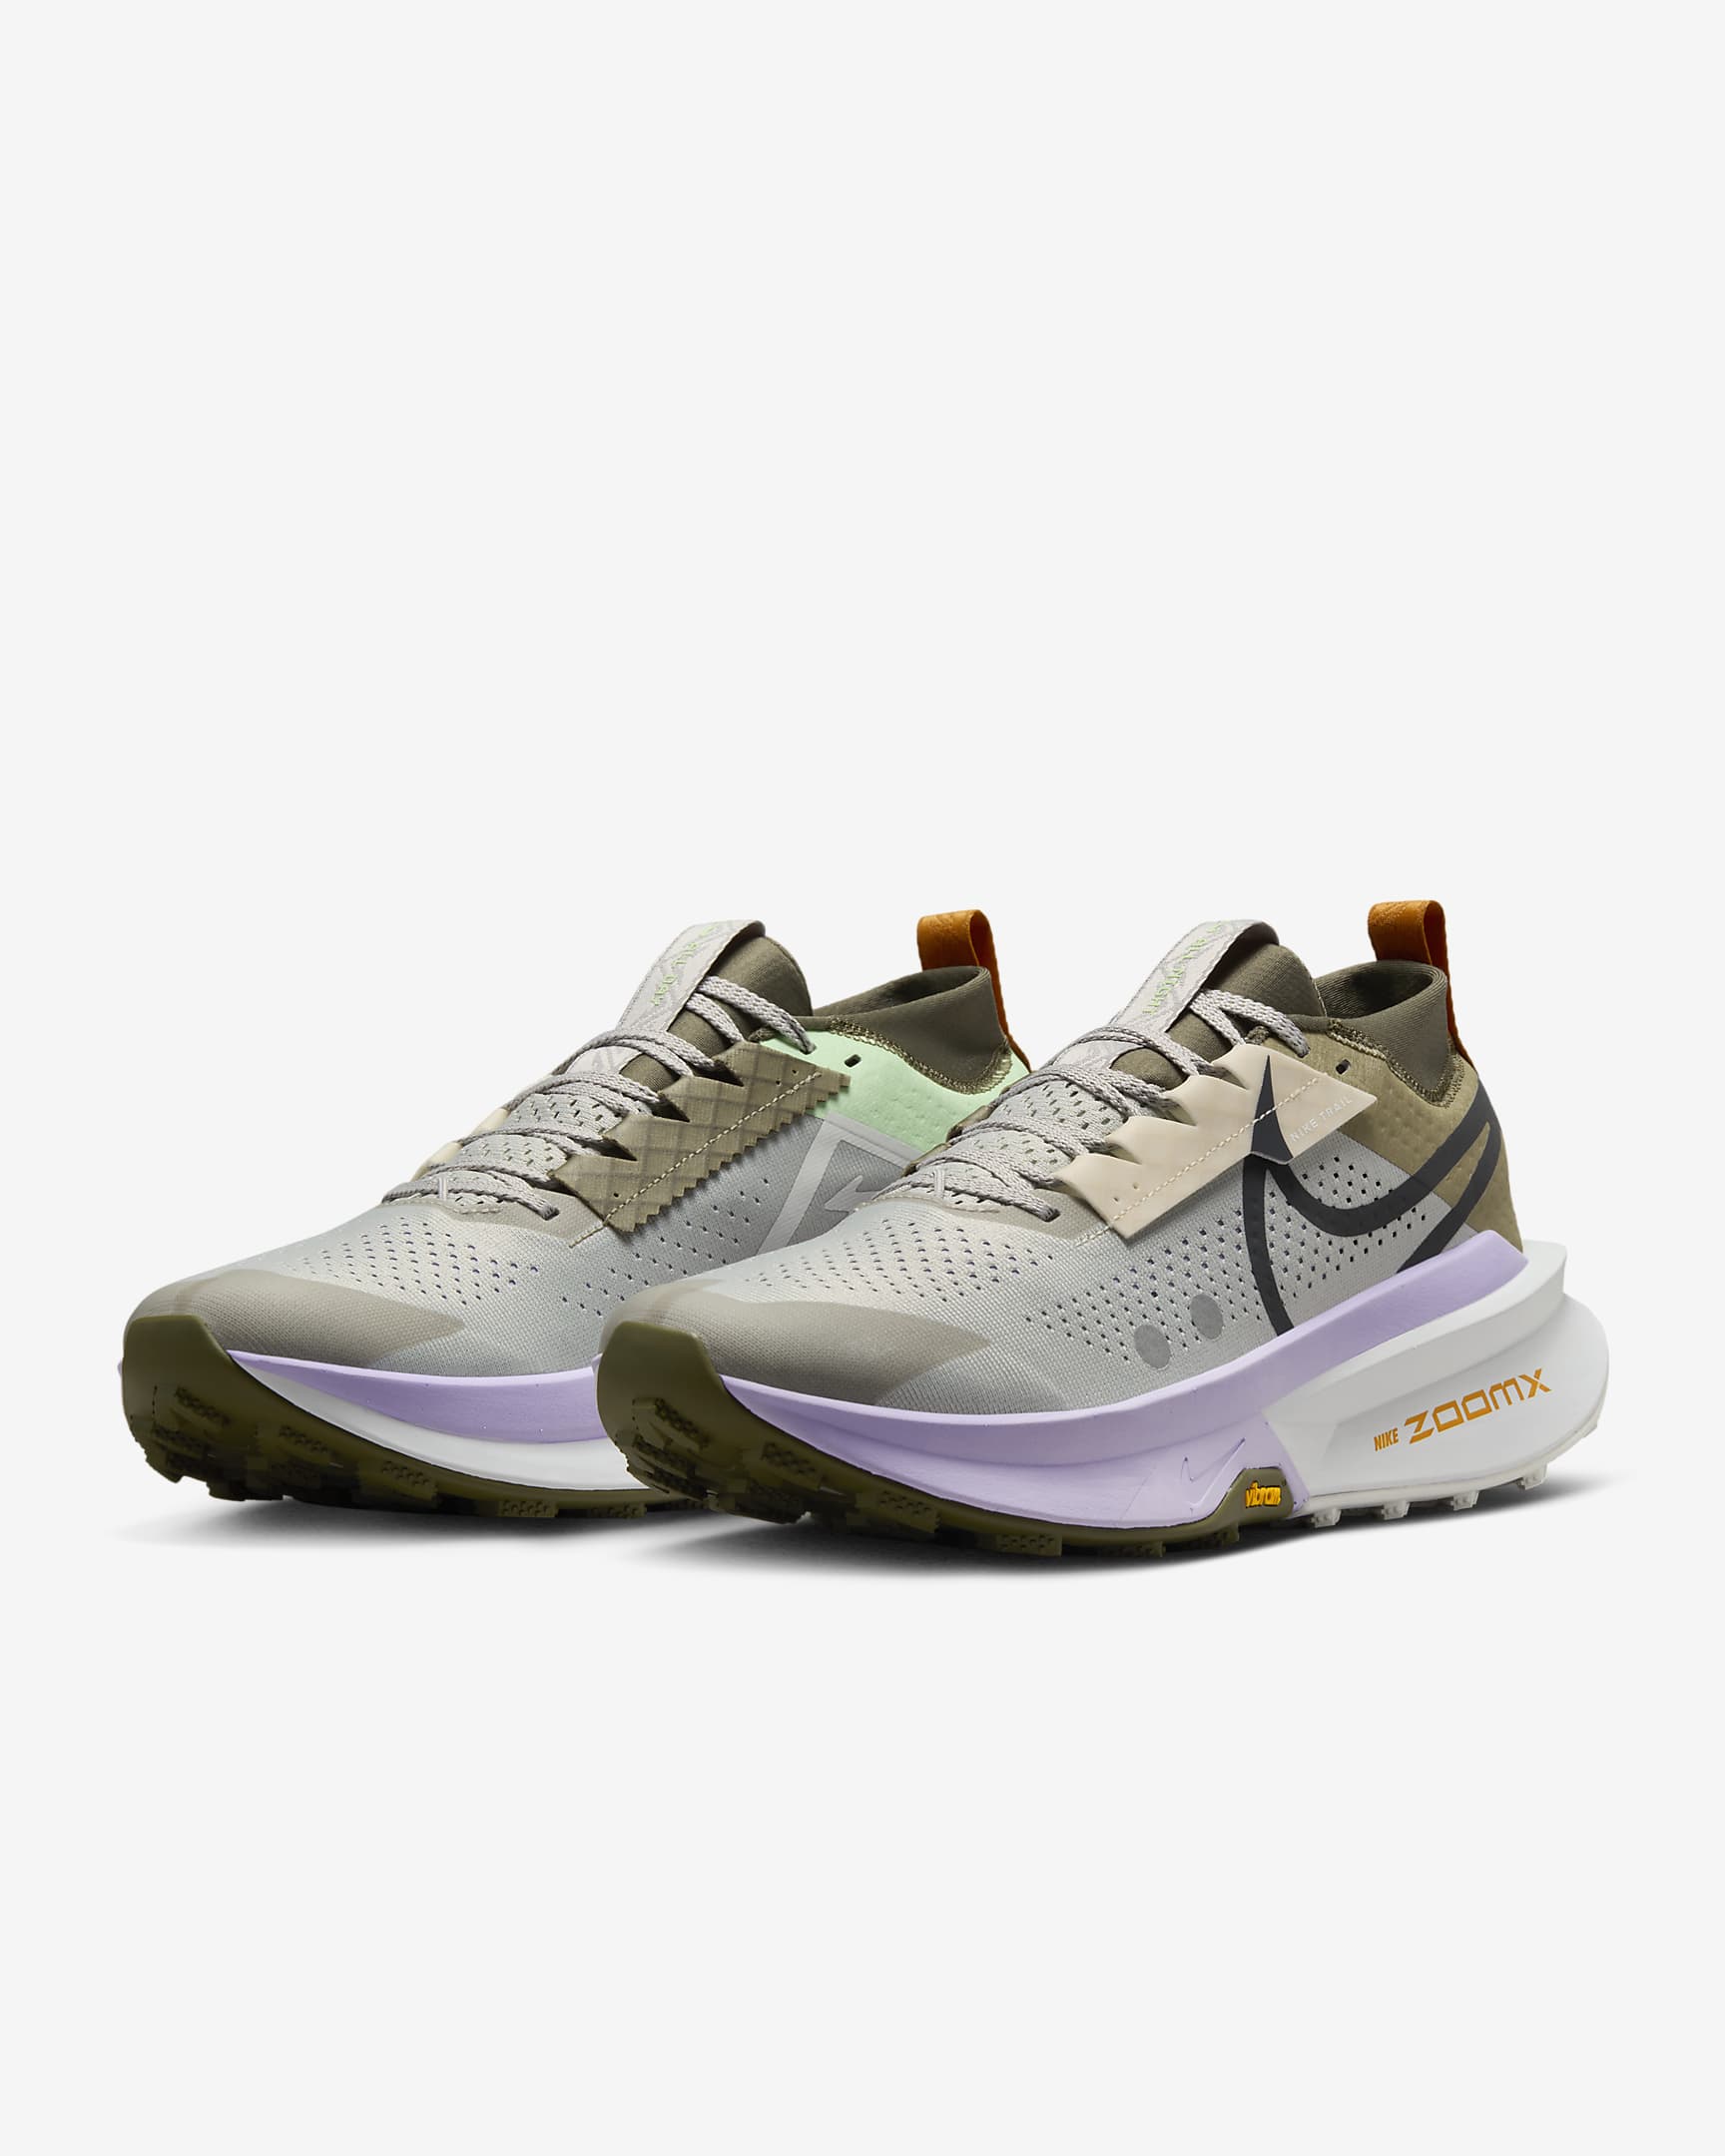 Nike Zegama Trail 2 Men's Trail-Running Shoes - Light Iron Ore/Vapour Green/Lilac Bloom/Anthracite